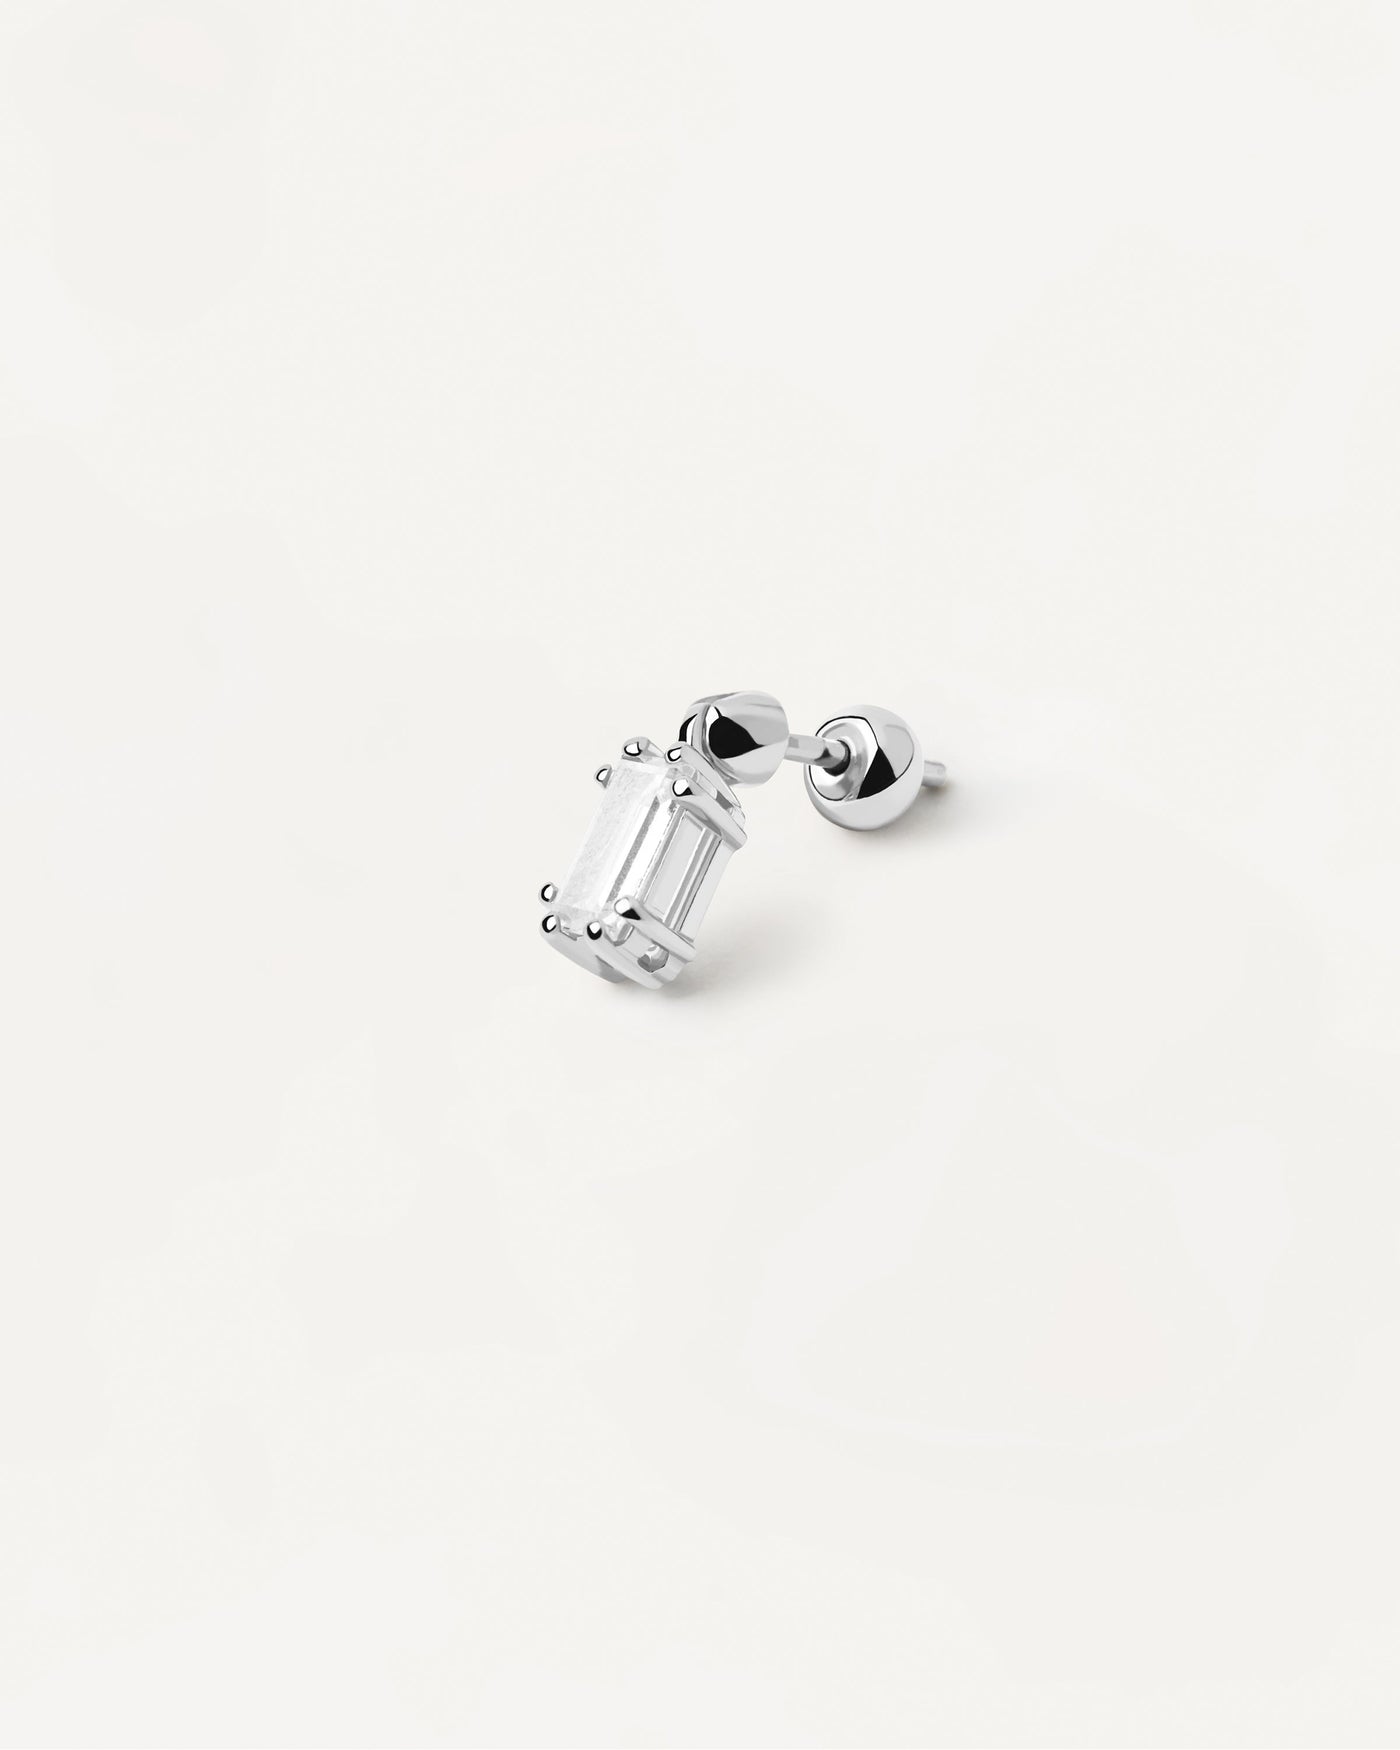 2023 Selection | Ali Single Silver Earring. Sterling silver ear piercing with baguette cut white zirconia. Get the latest arrival from PDPAOLA. Place your order safely and get this Best Seller. Free Shipping.